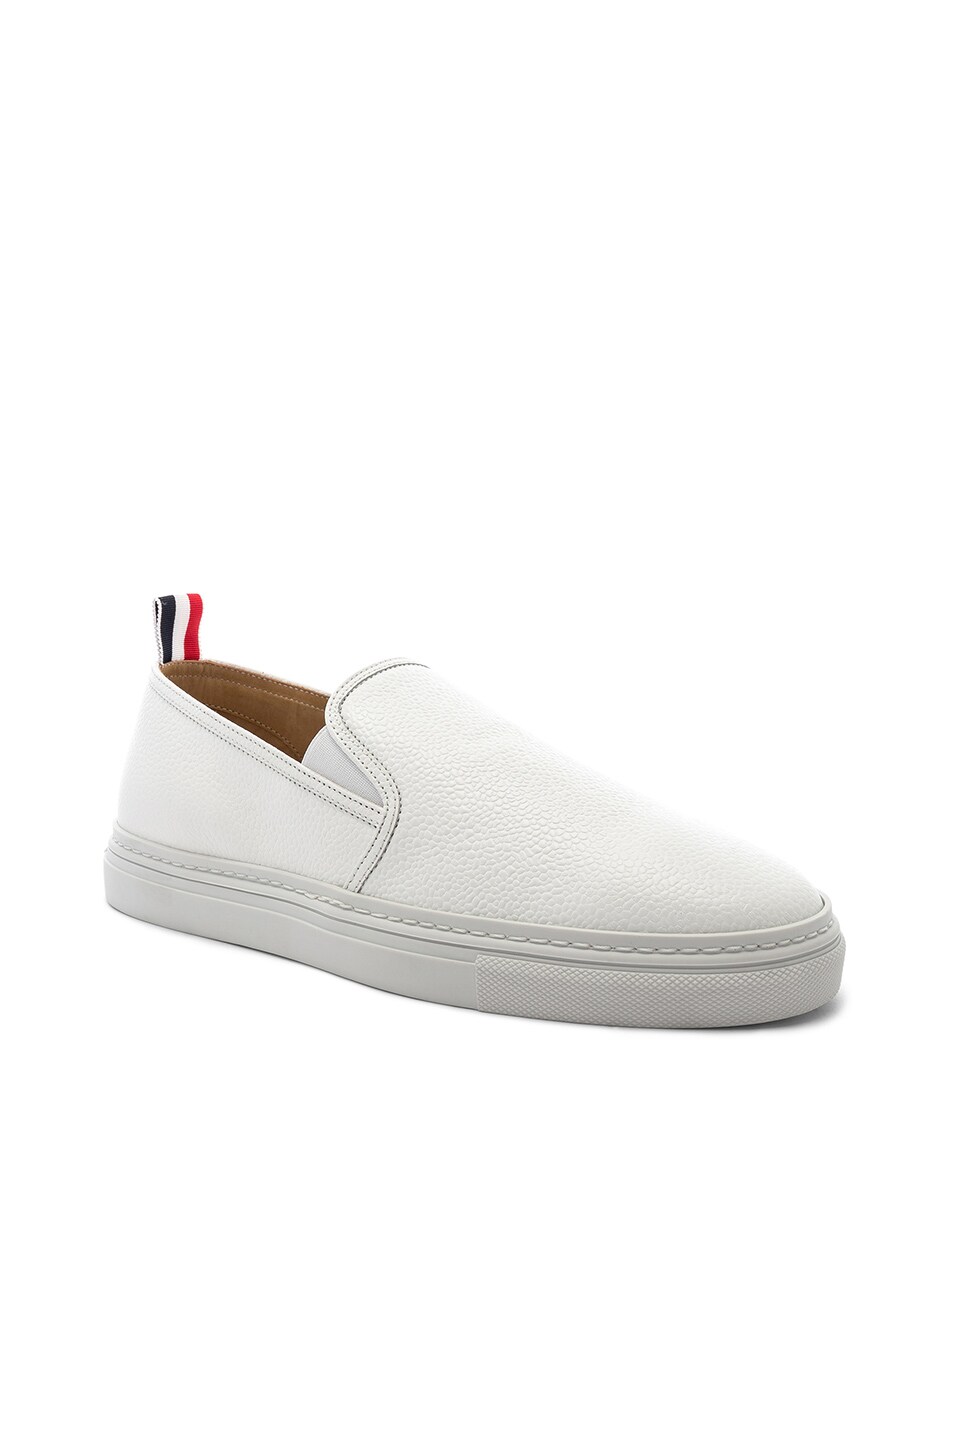 Image 1 of Thom Browne Slip On Trainer in White